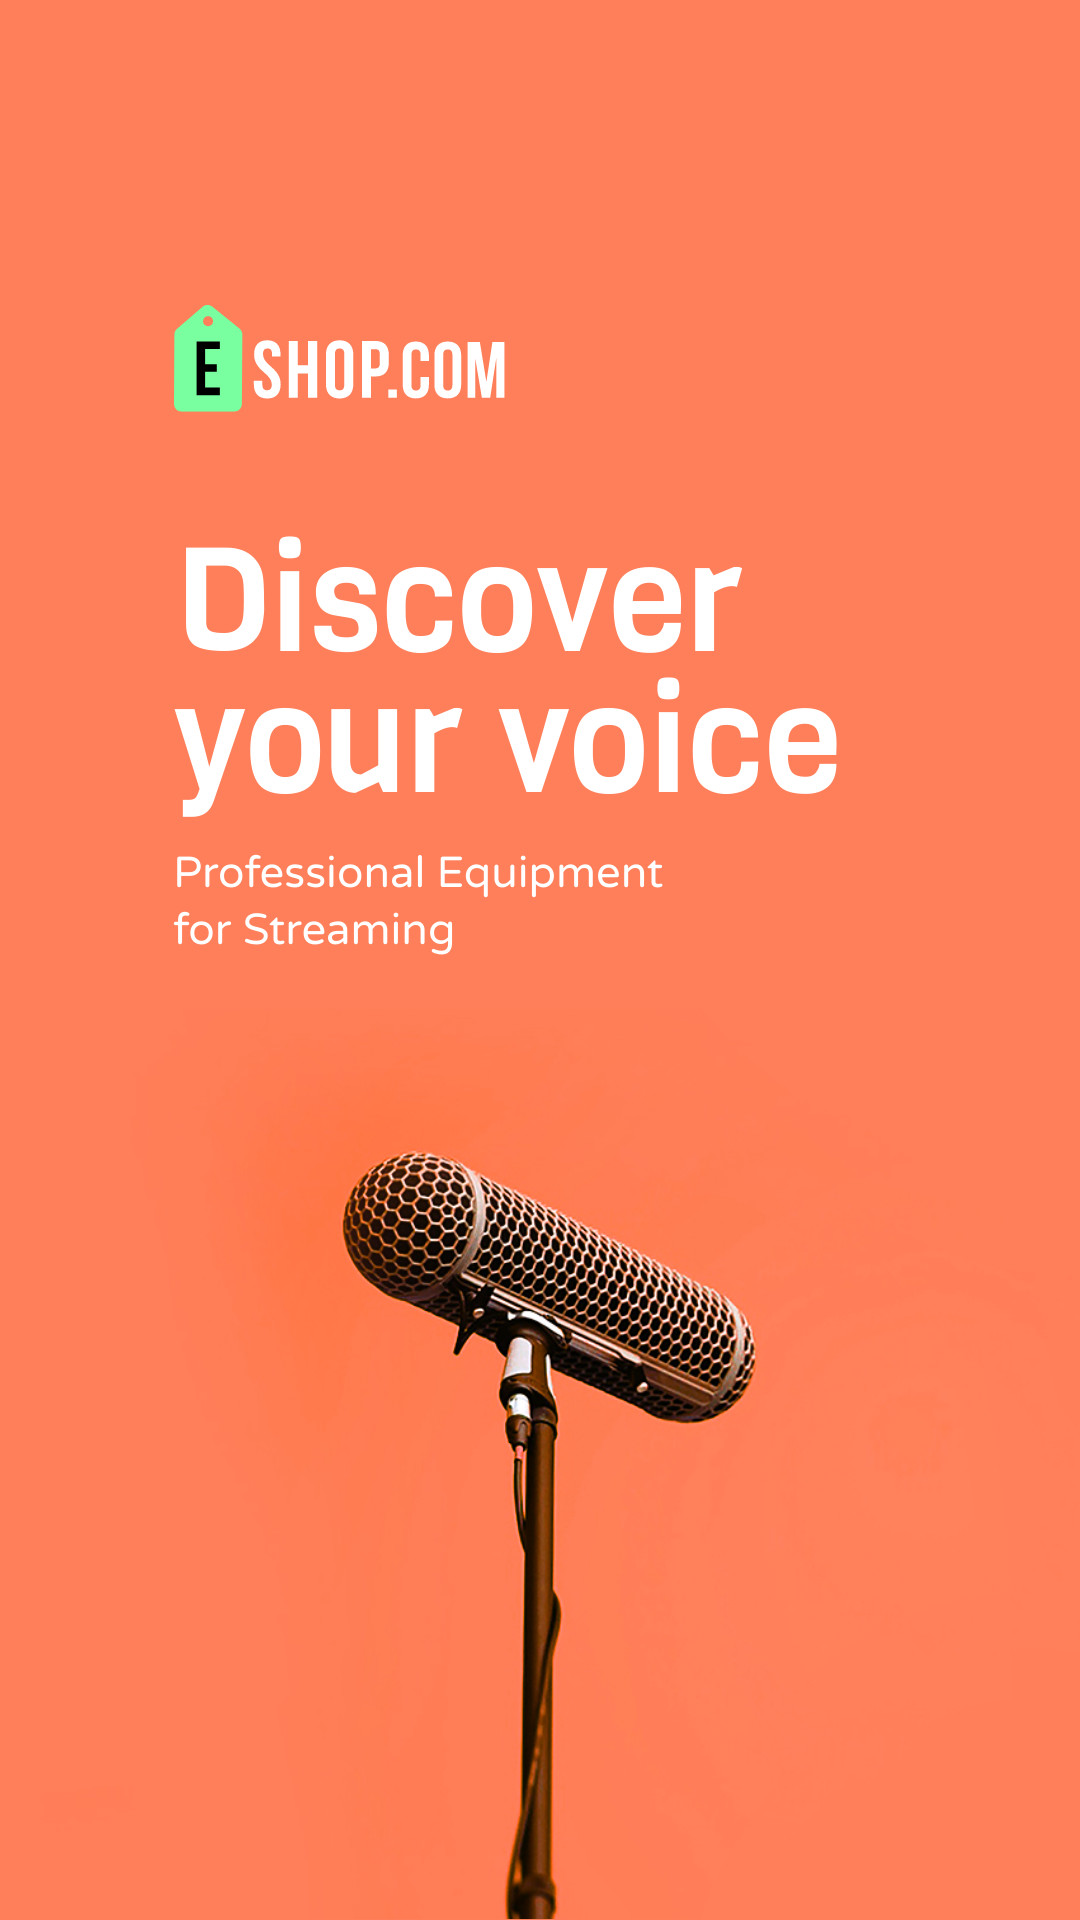 Discover Your Voice Streaming Equipment 